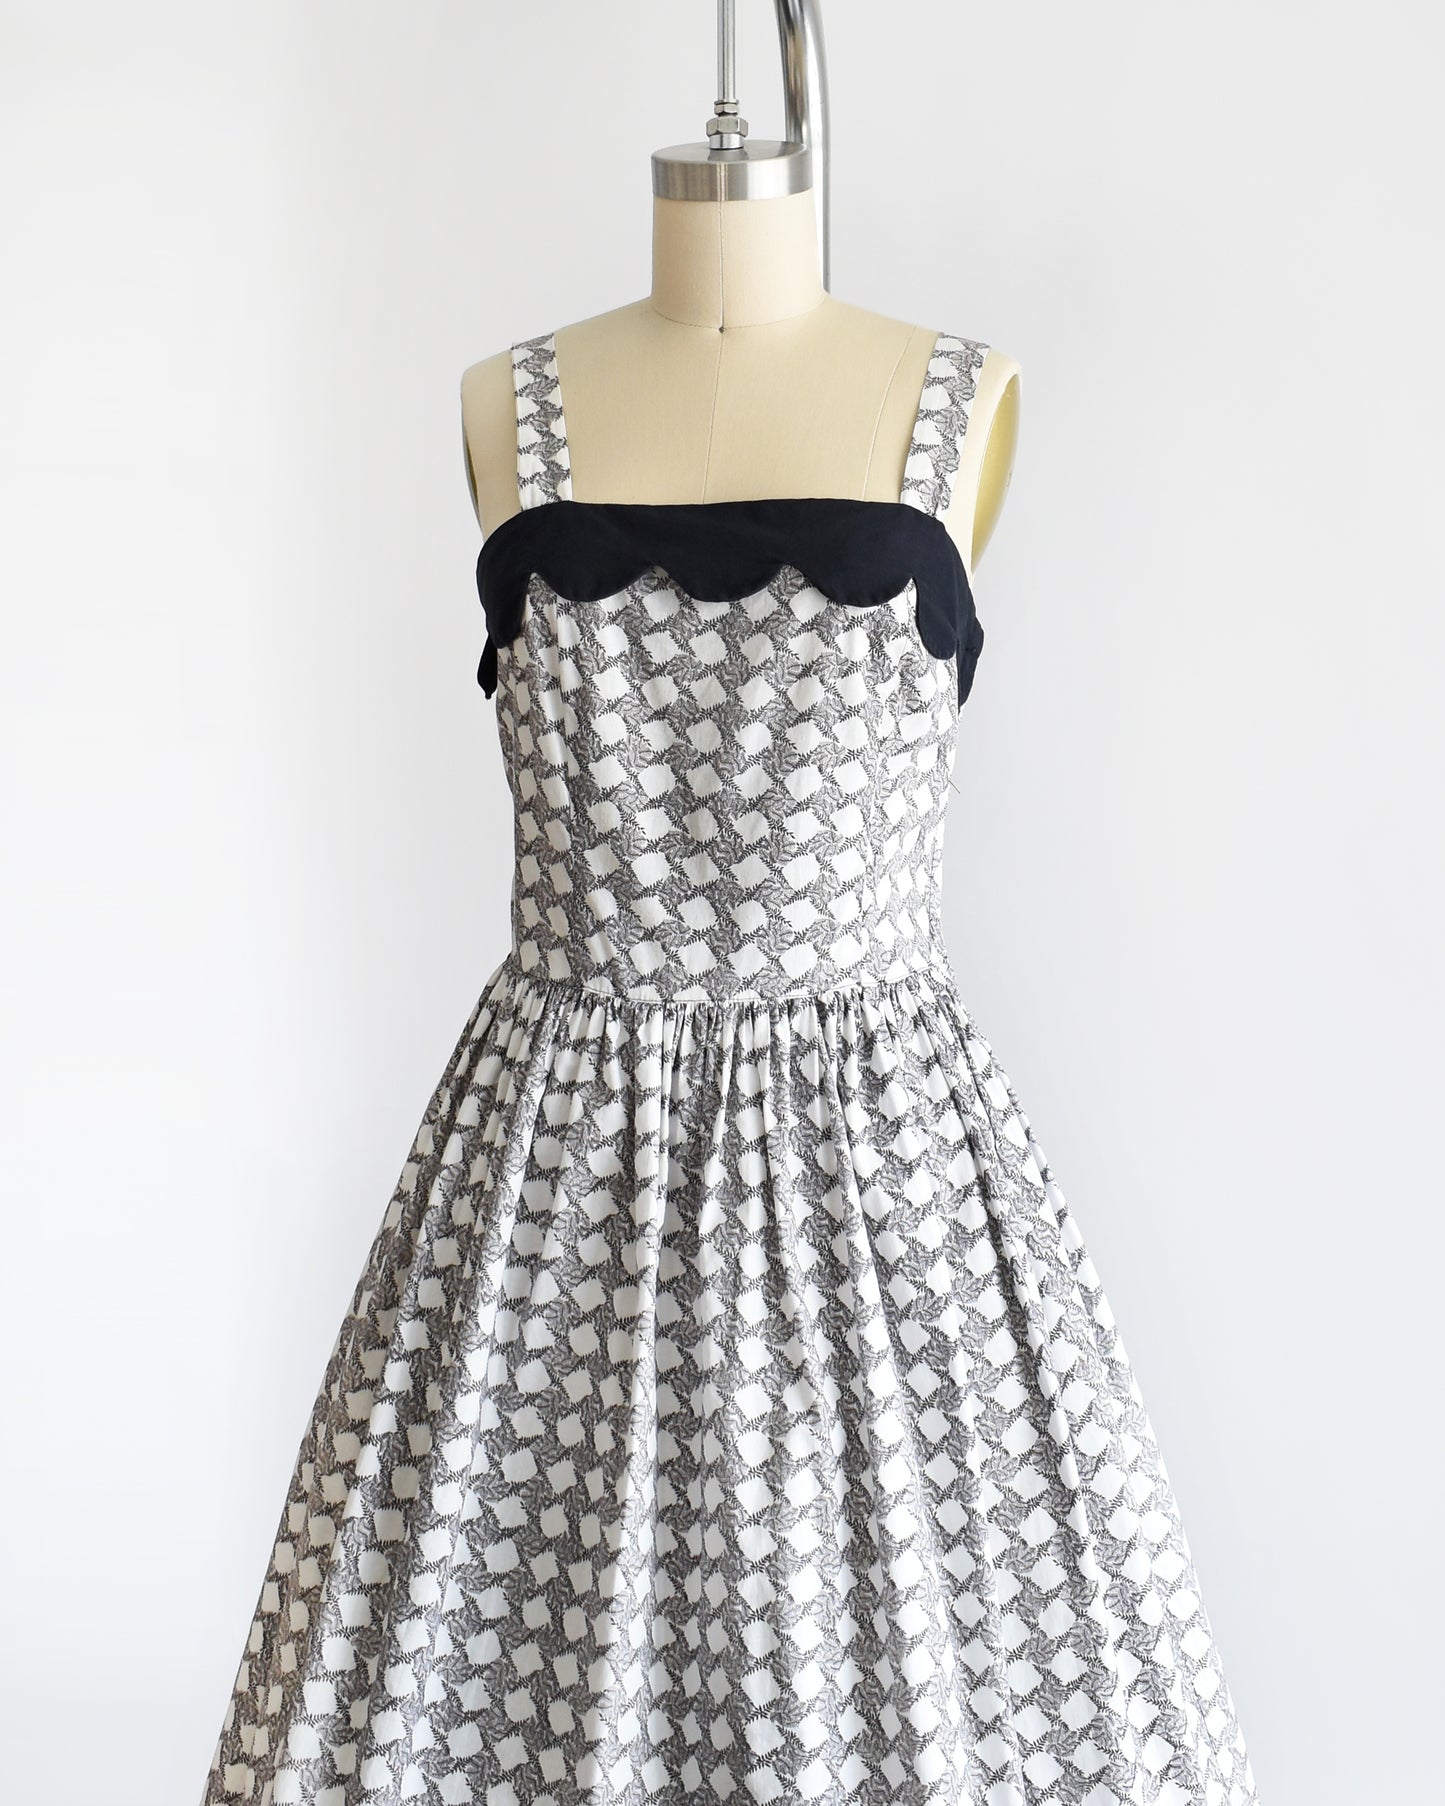 Side front view of a vintage 1950s white dress with a  black fern motif that forms a diamond print. The dress has a black scalloped neckline and fit and flare skirt.